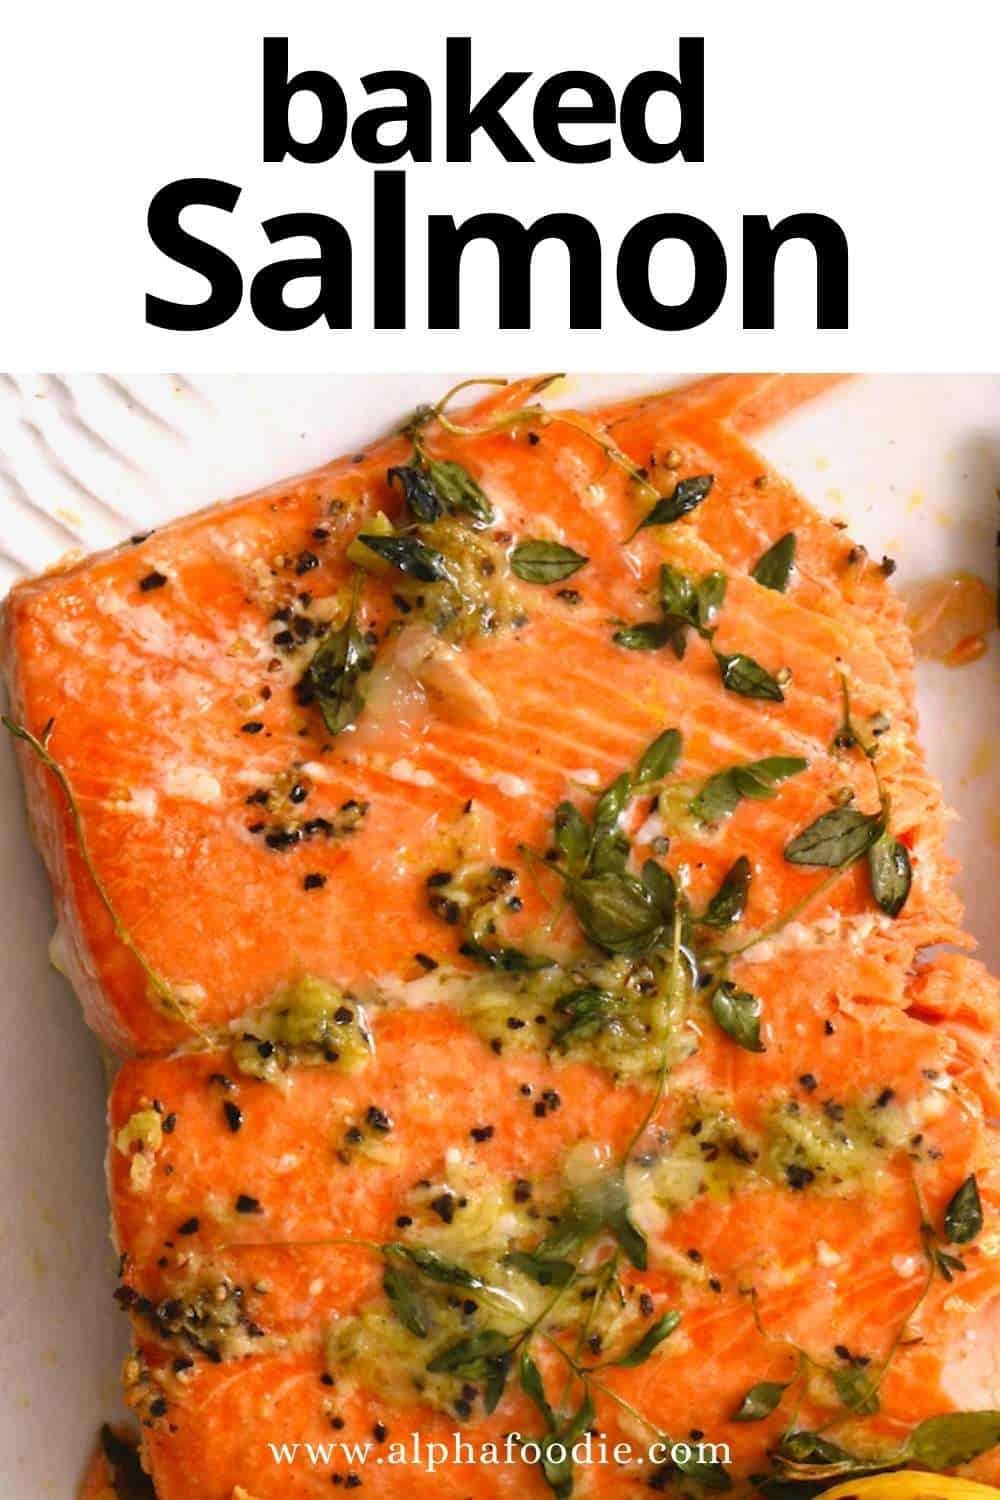 The Best Oven Baked Salmon - Alphafoodie